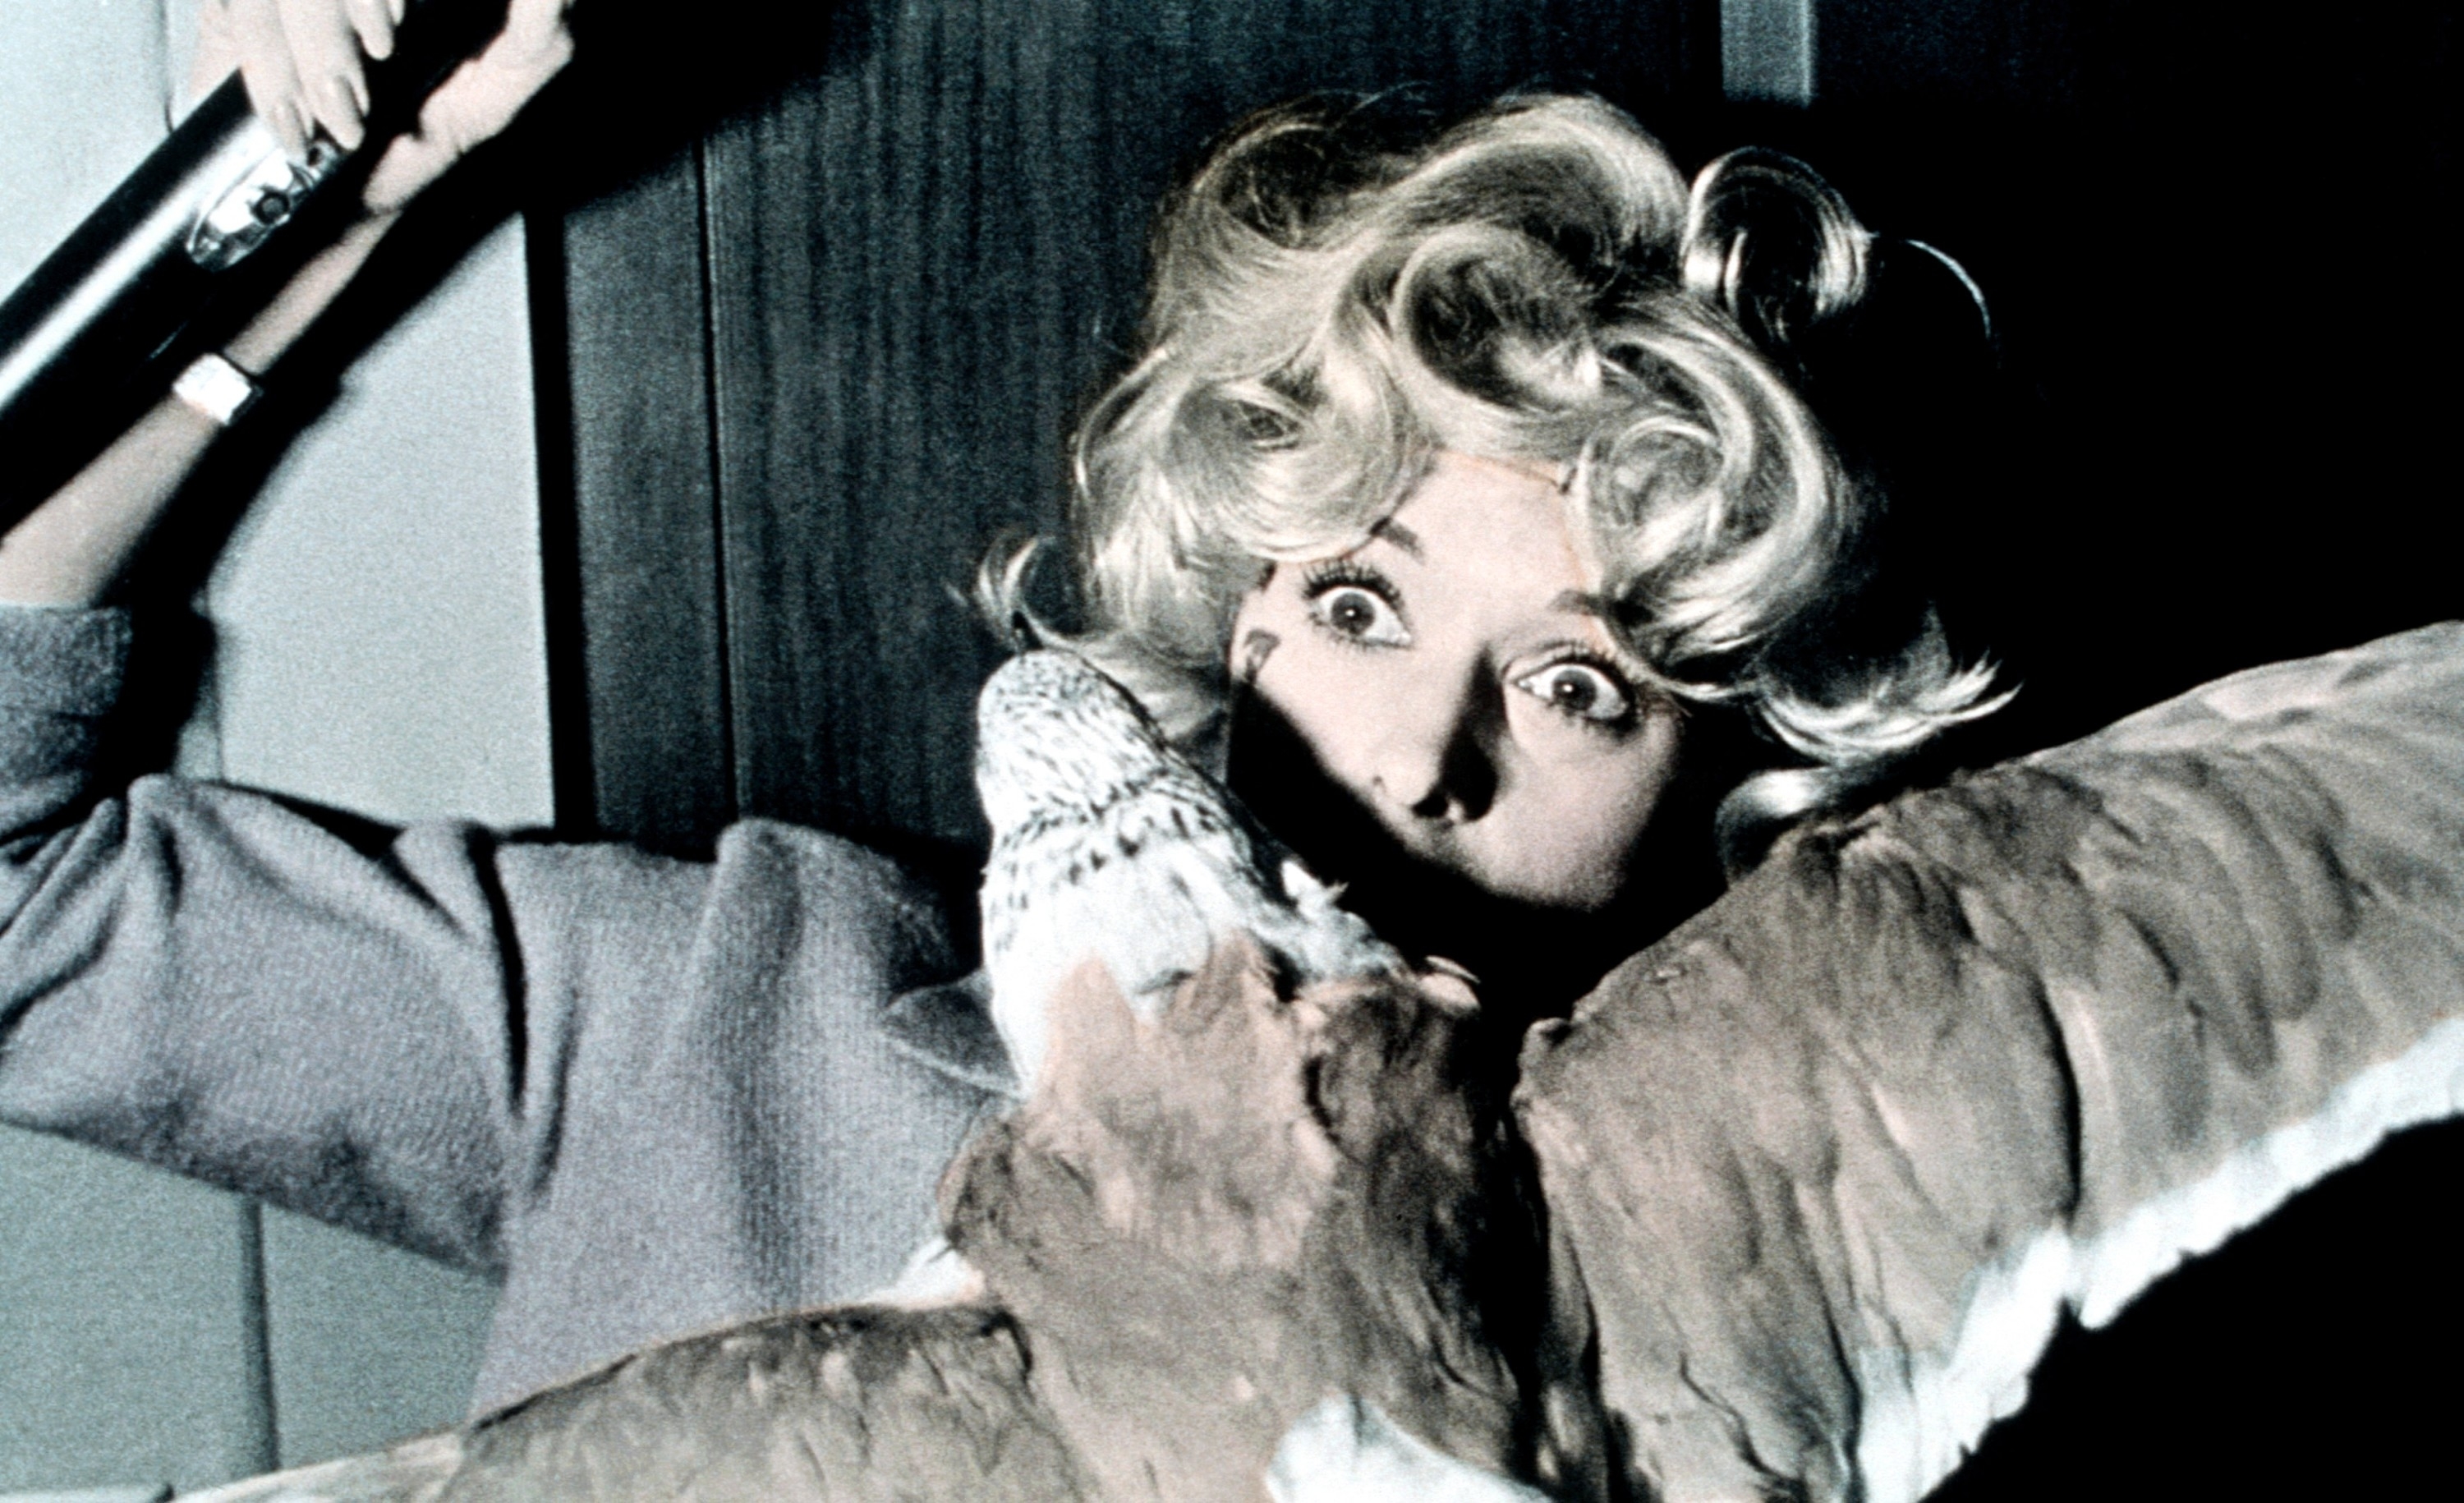 birds attacking her in the film